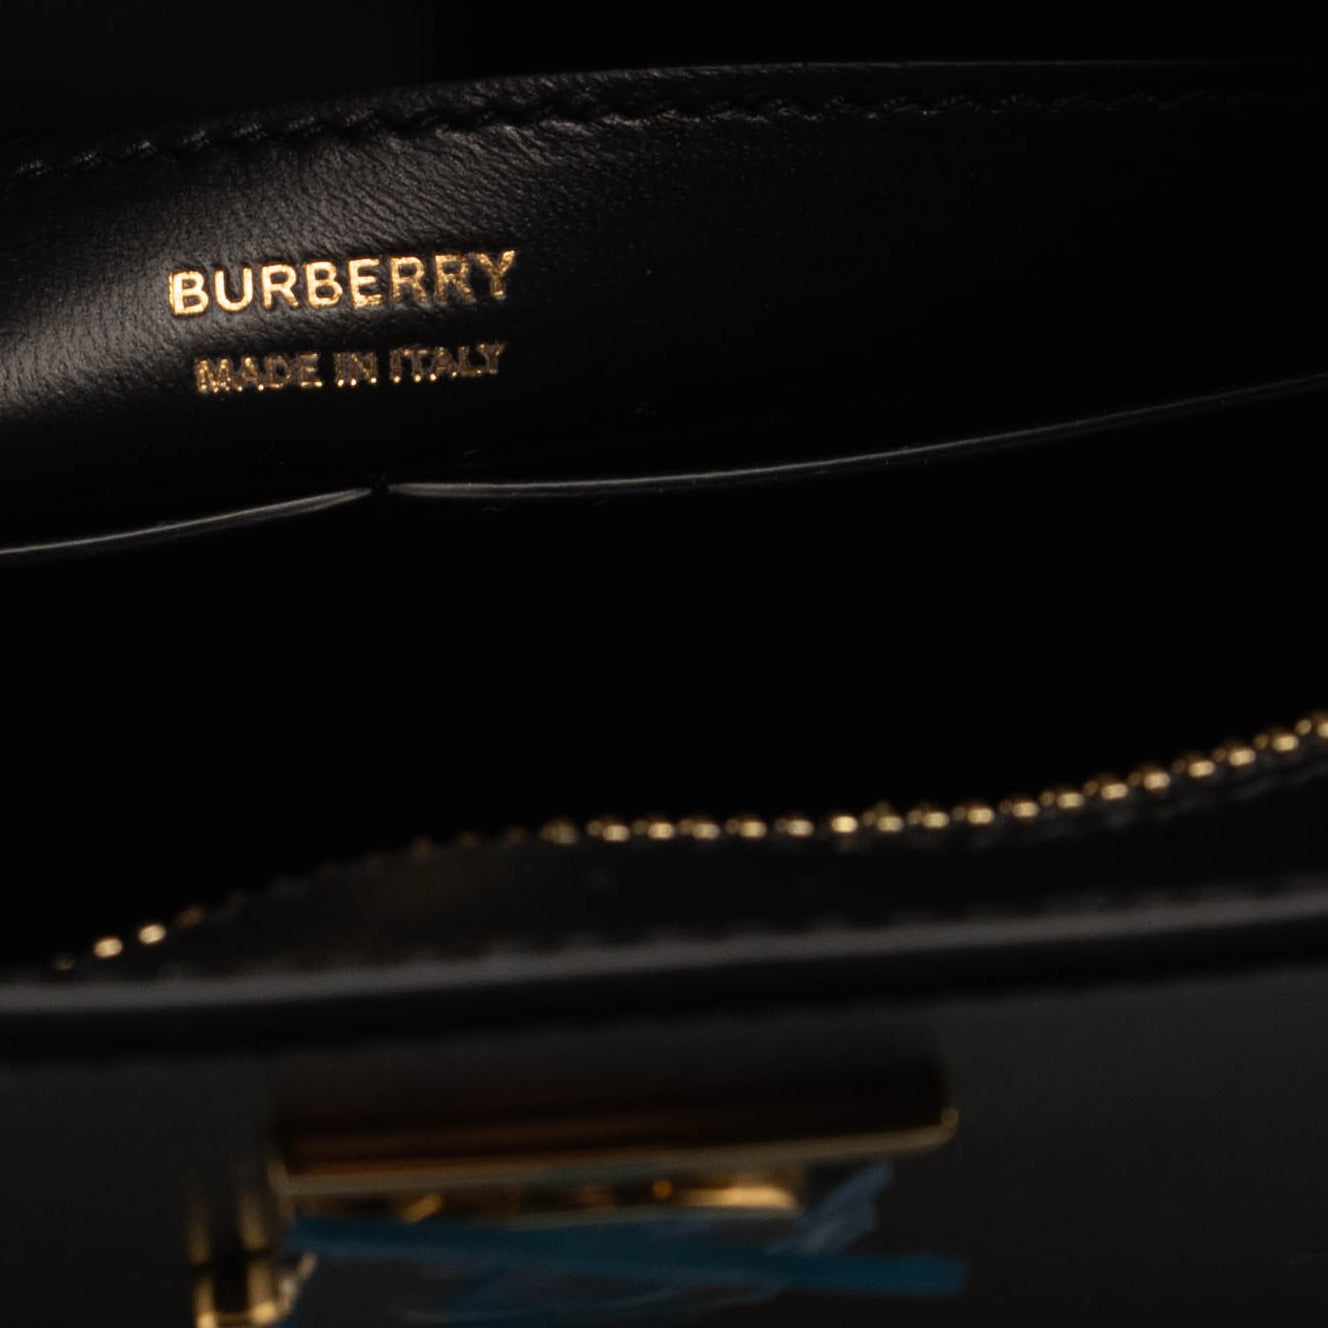 BURBERRY London Leather Pouch (Black) Made in Italy